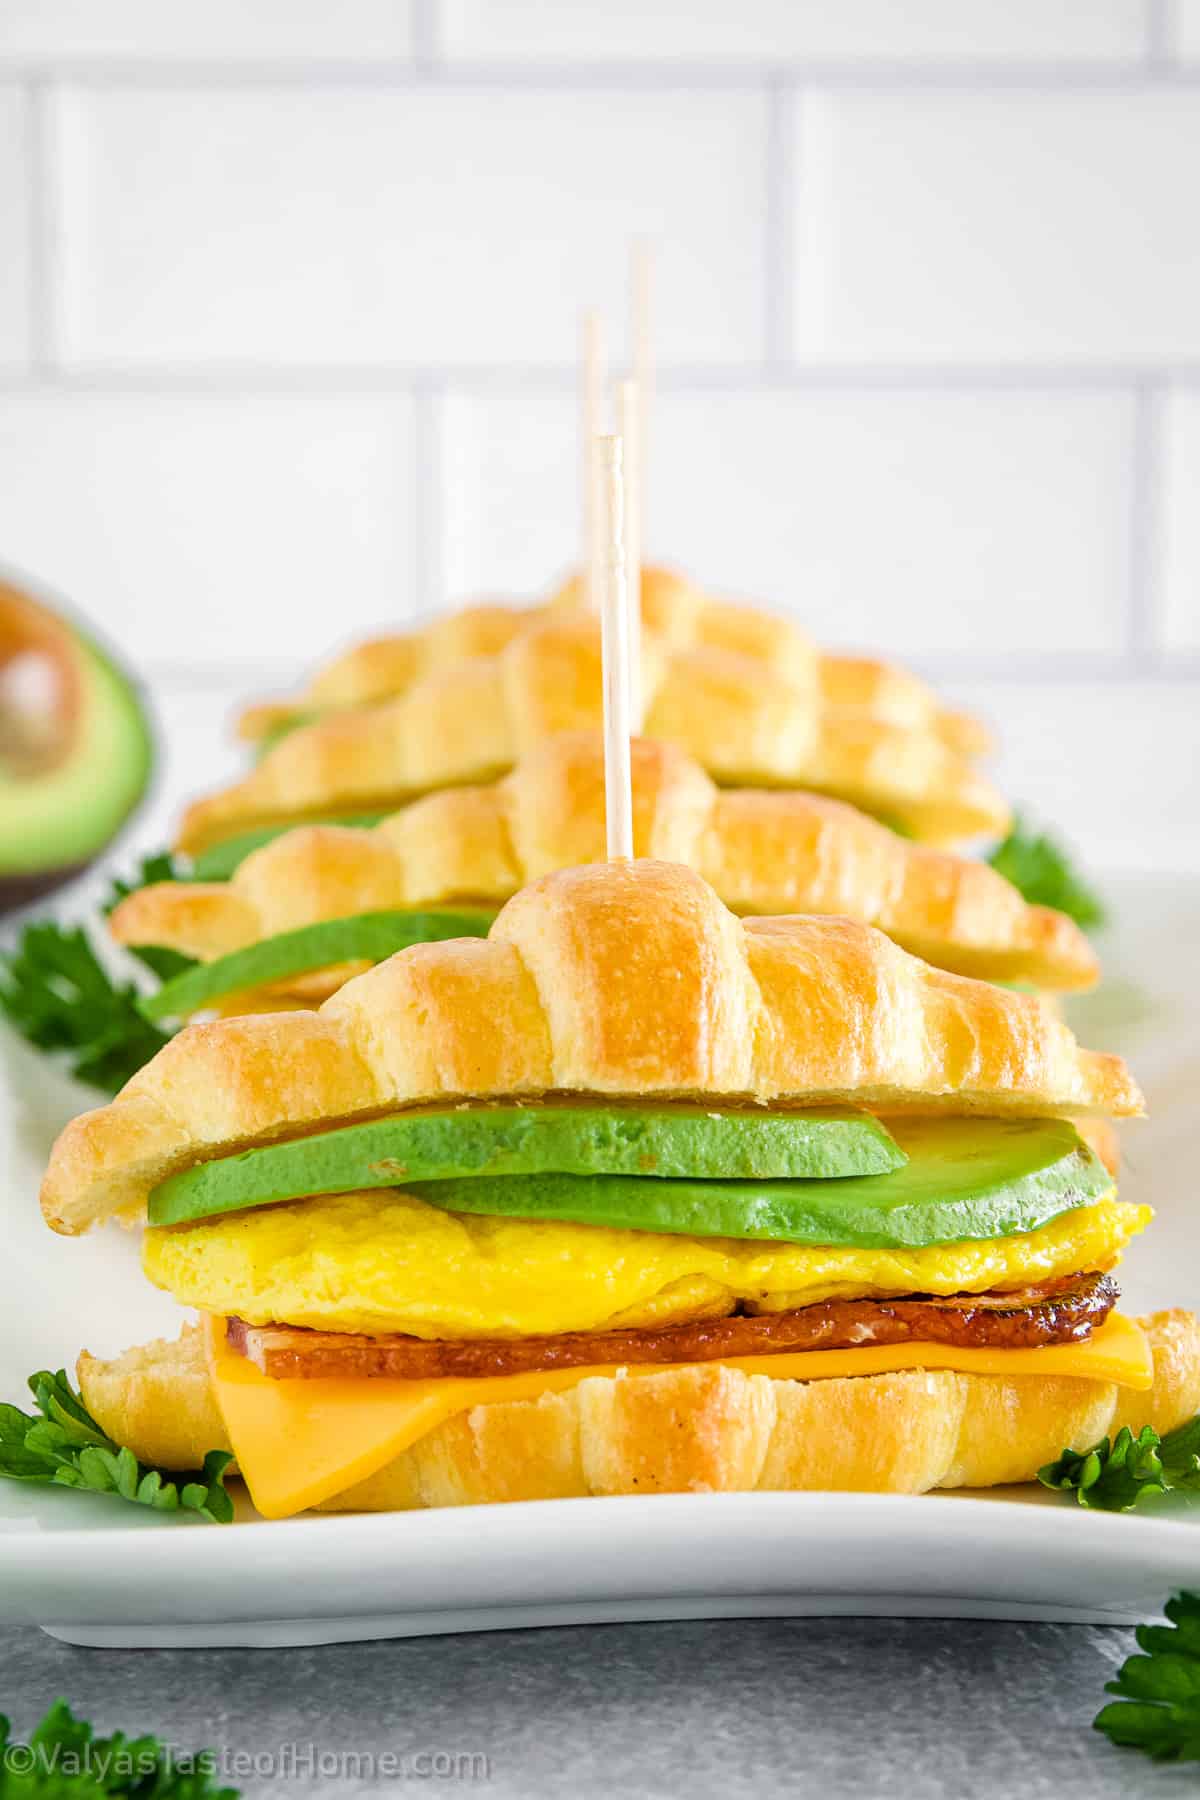 A breakfast sandwich is a delicious and nutritious breakfast option that is perfect for busy mornings.